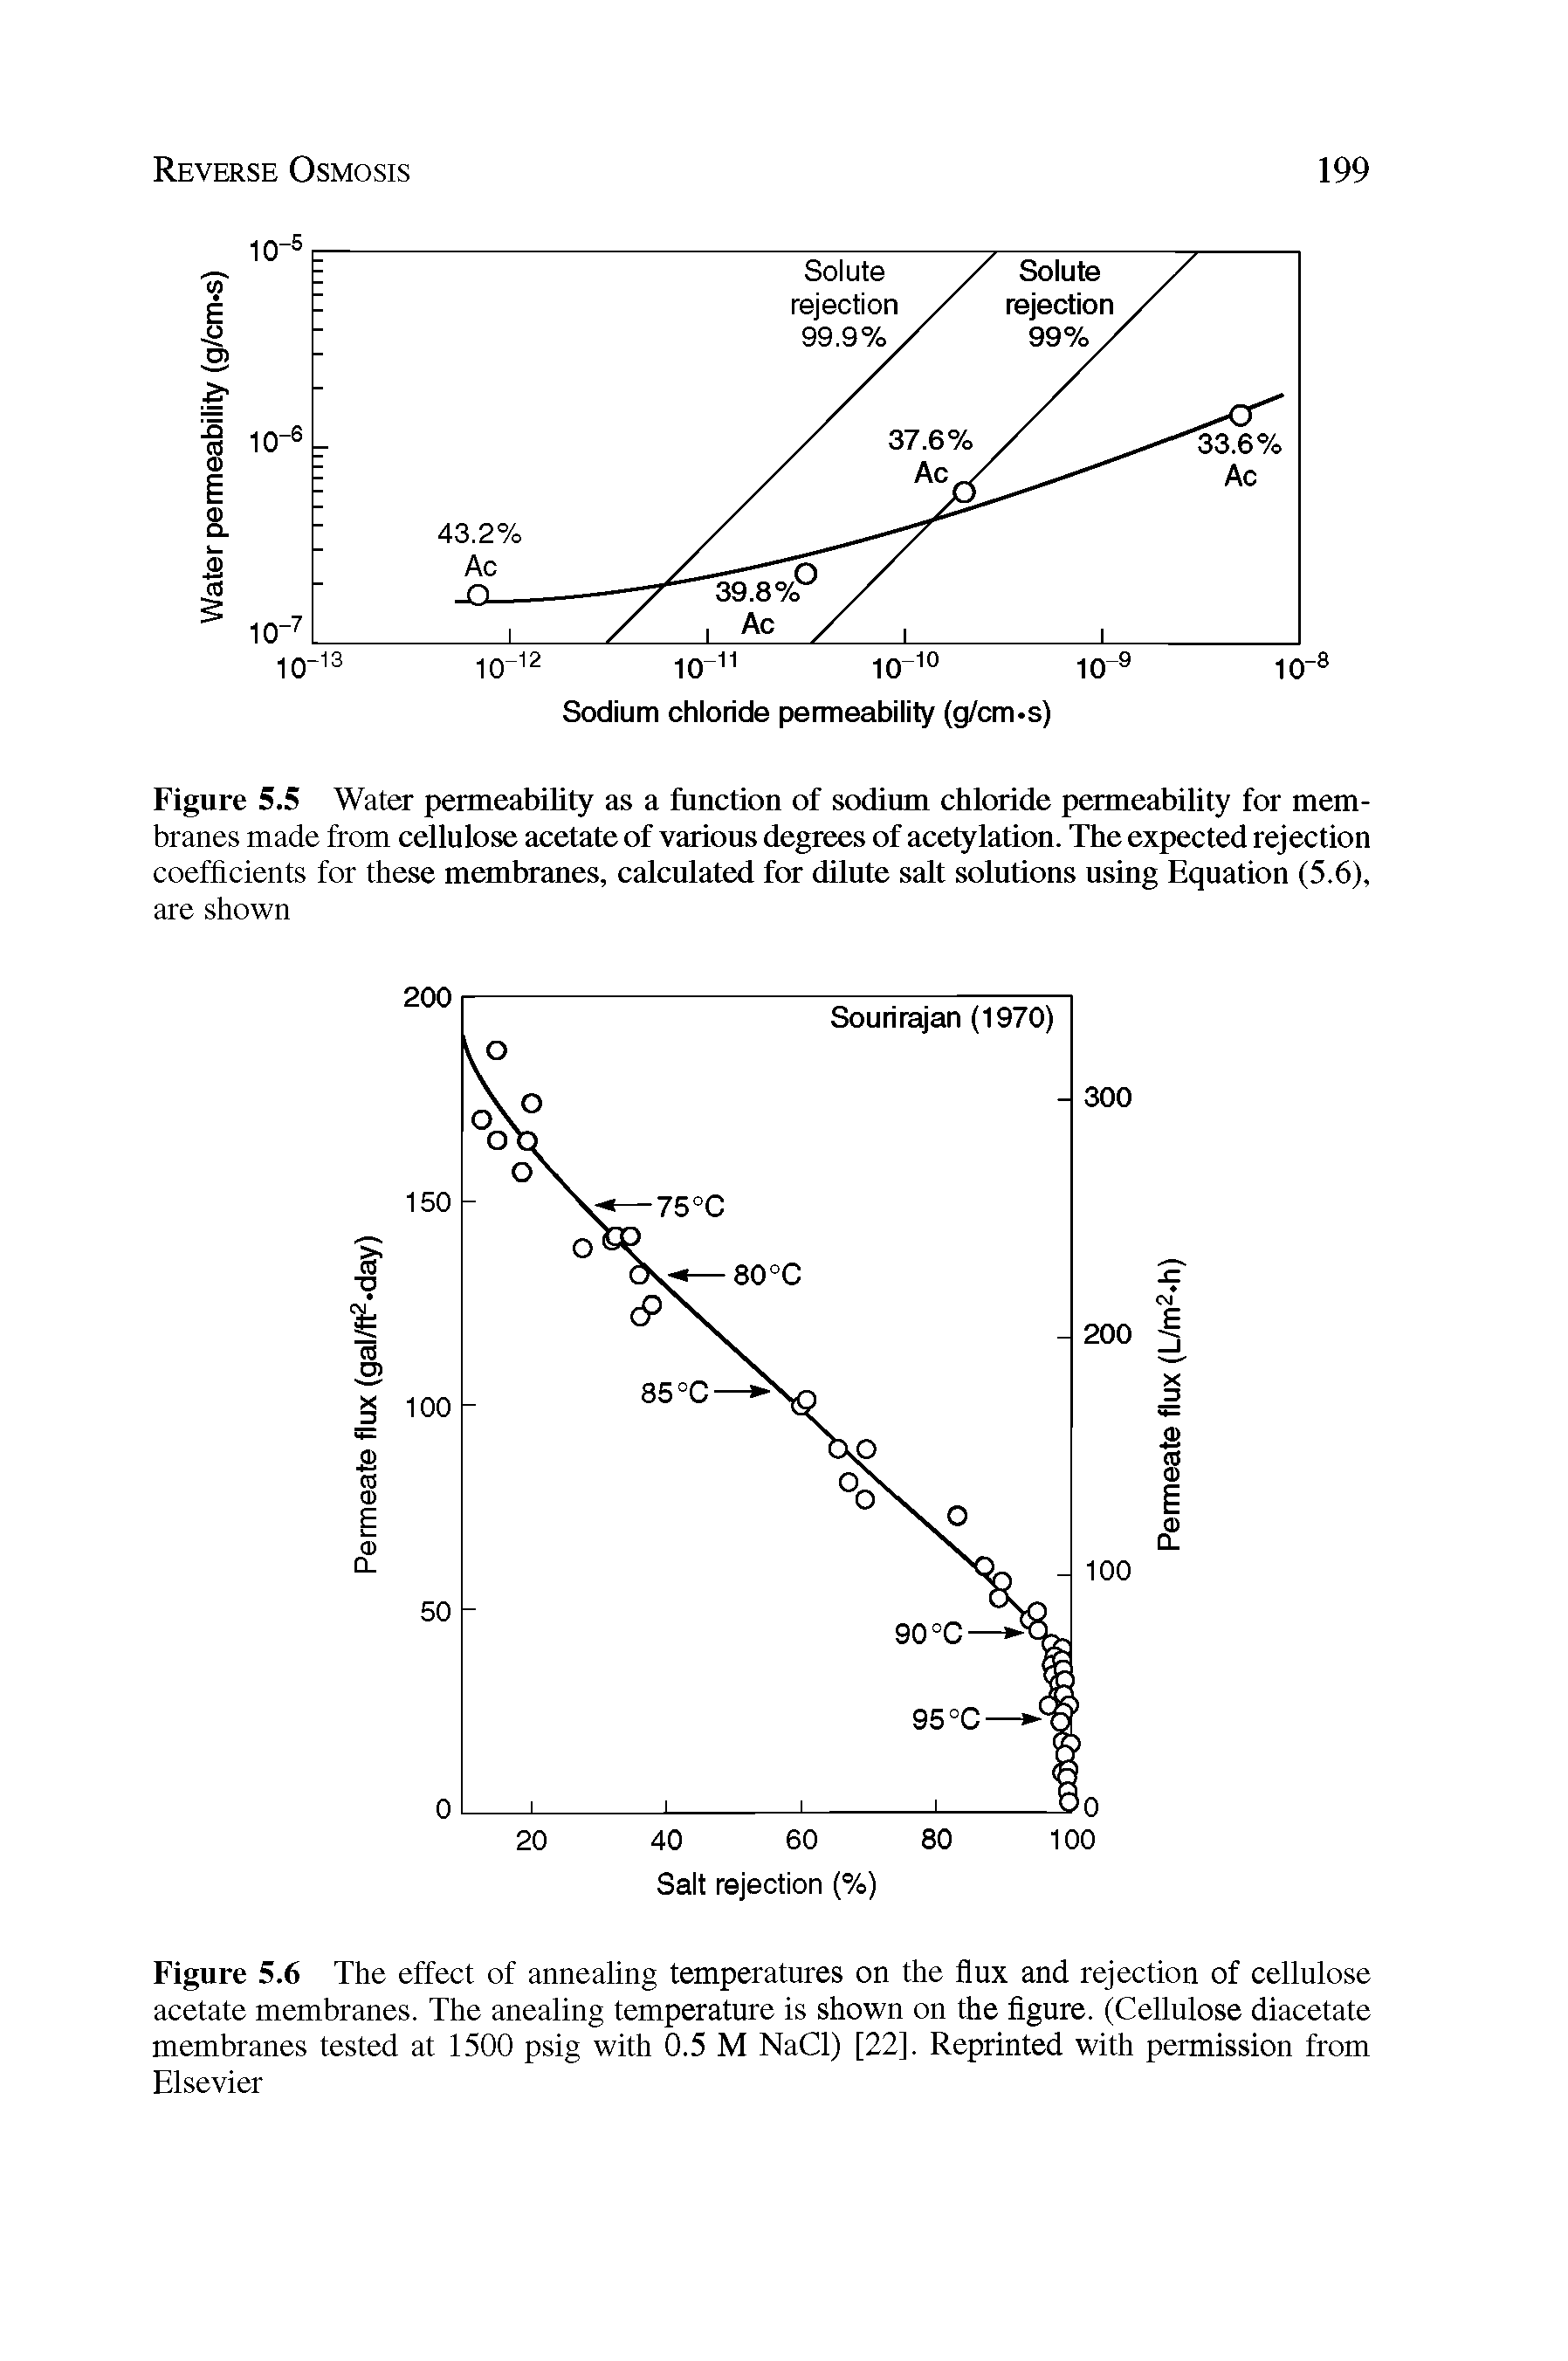 Figure 5.5 Water permeability as a function of sodium chloride permeability for membranes made from cellulose acetate of various degrees of acetylation. The expected rejection coefficients for these membranes, calculated for dilute salt solutions using Equation (5.6),...